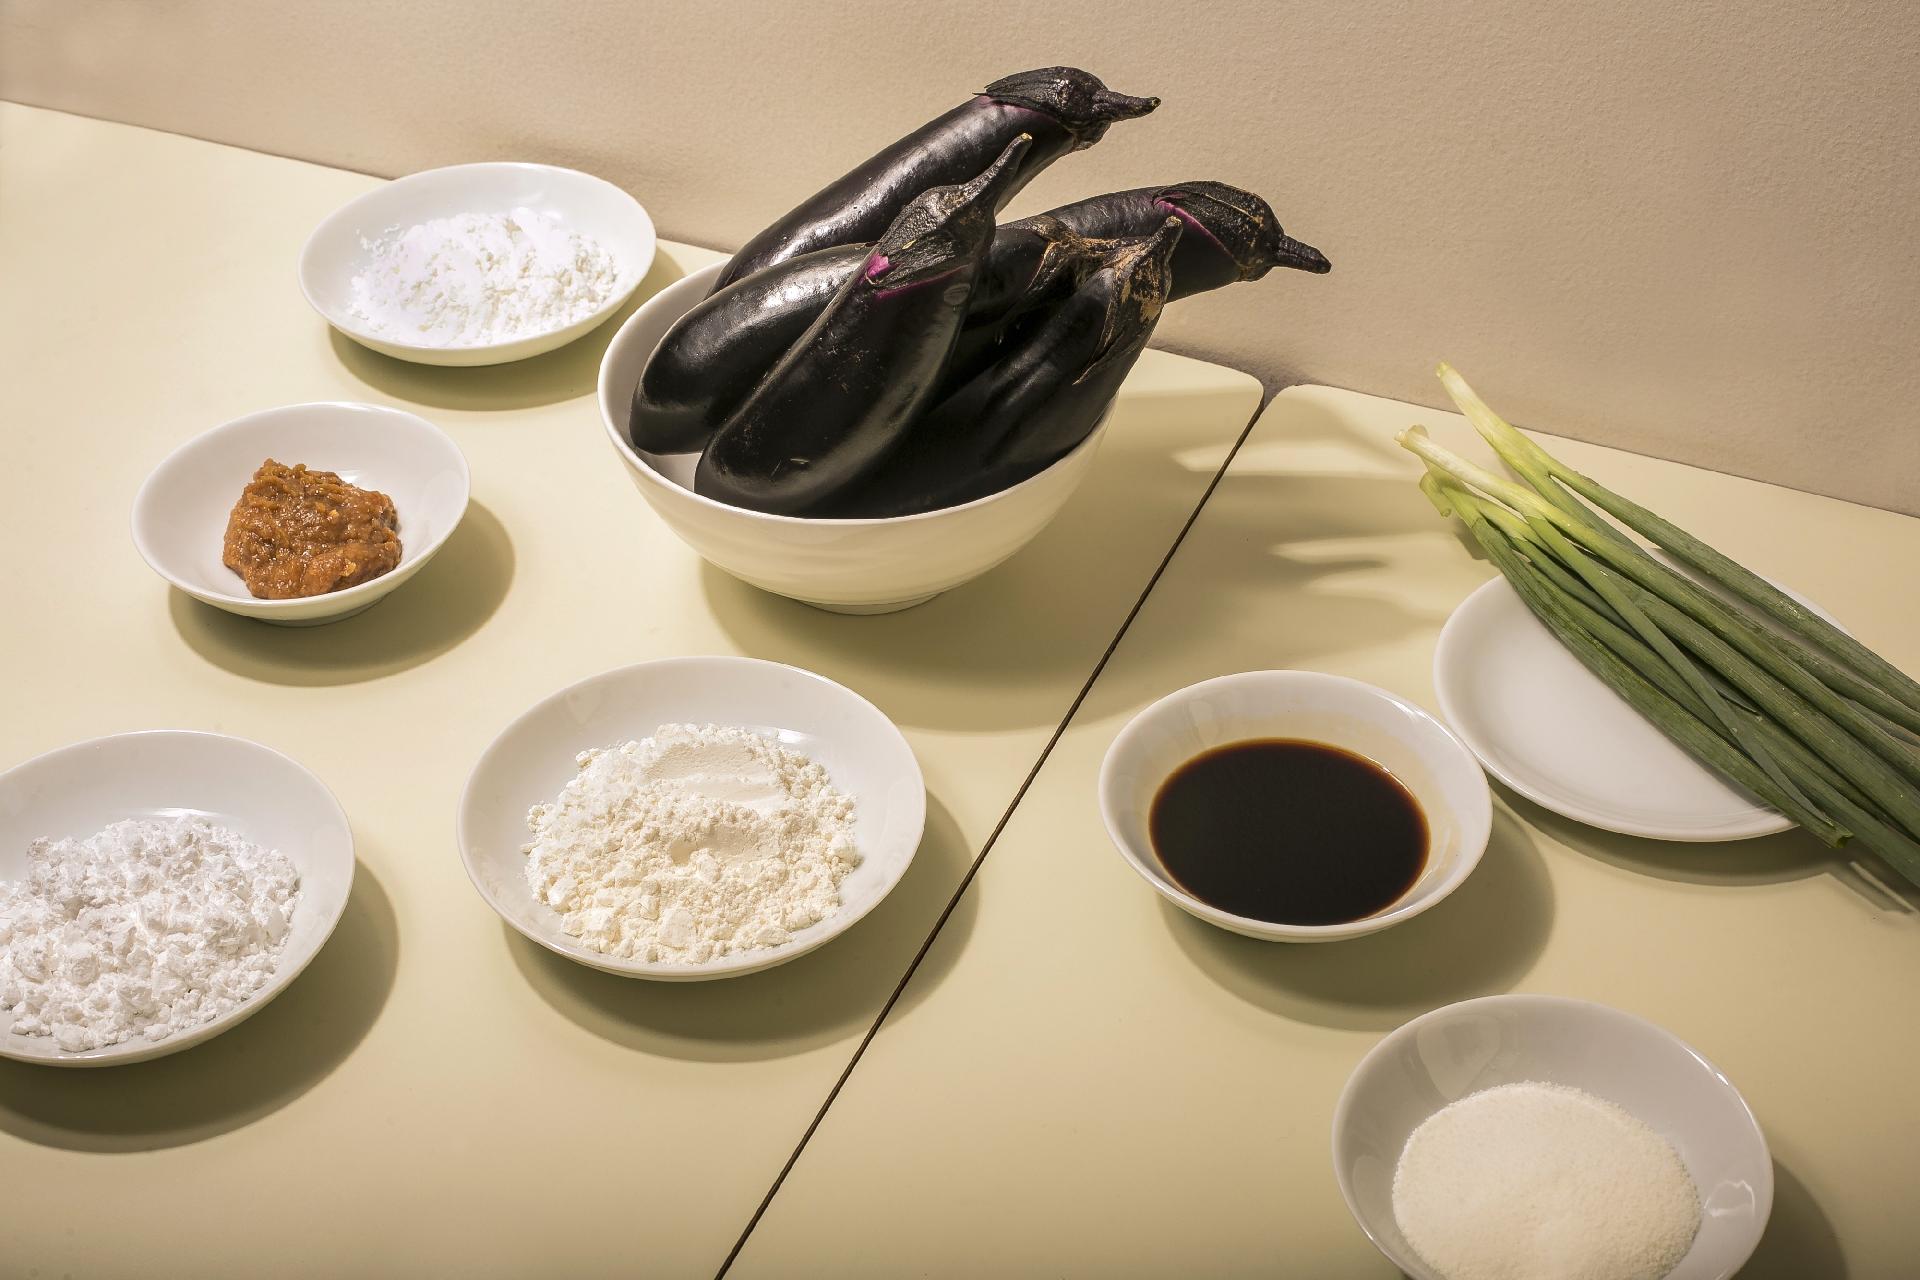 Family recipe - Eggplant with miso and soy sauce - Keiny Andrade/UOL